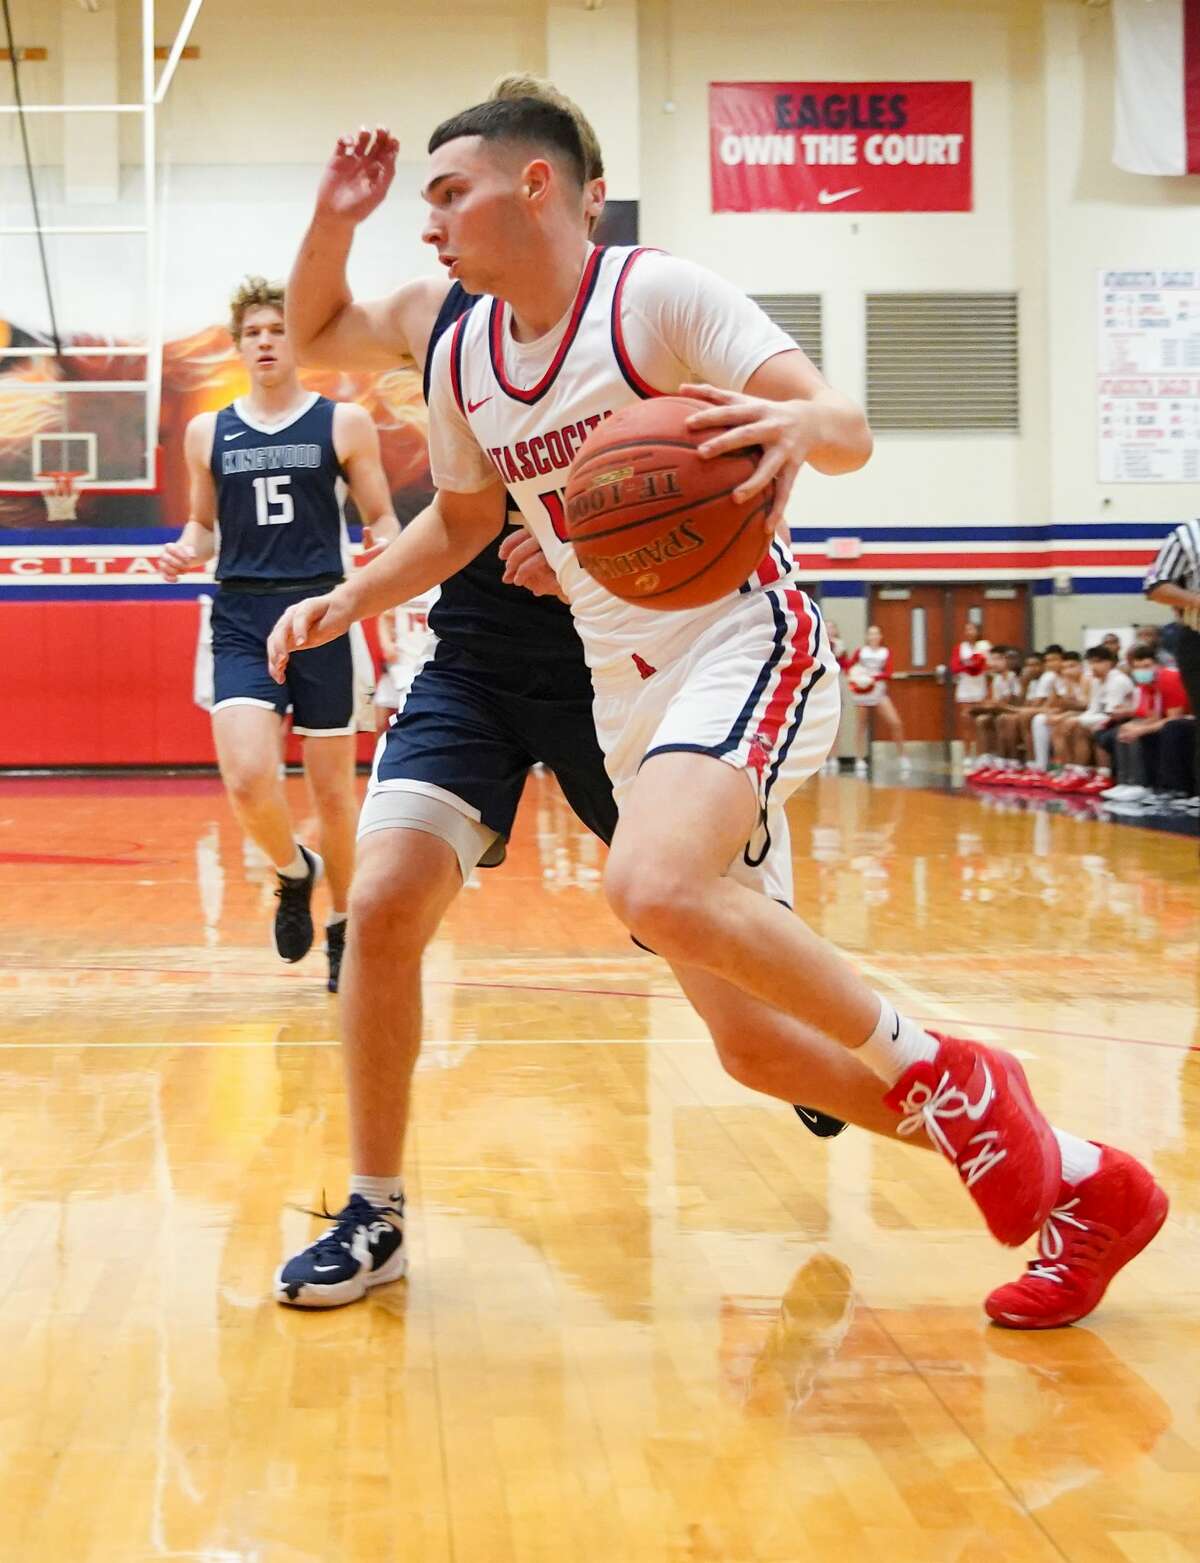 Atascocita guard A.J. Aungst (4) drives to the basket during District 21-6A boys basketball game against Kingwood in Humble on Friday, Jan. 21, 2022. Atascocita won the game 45-41.